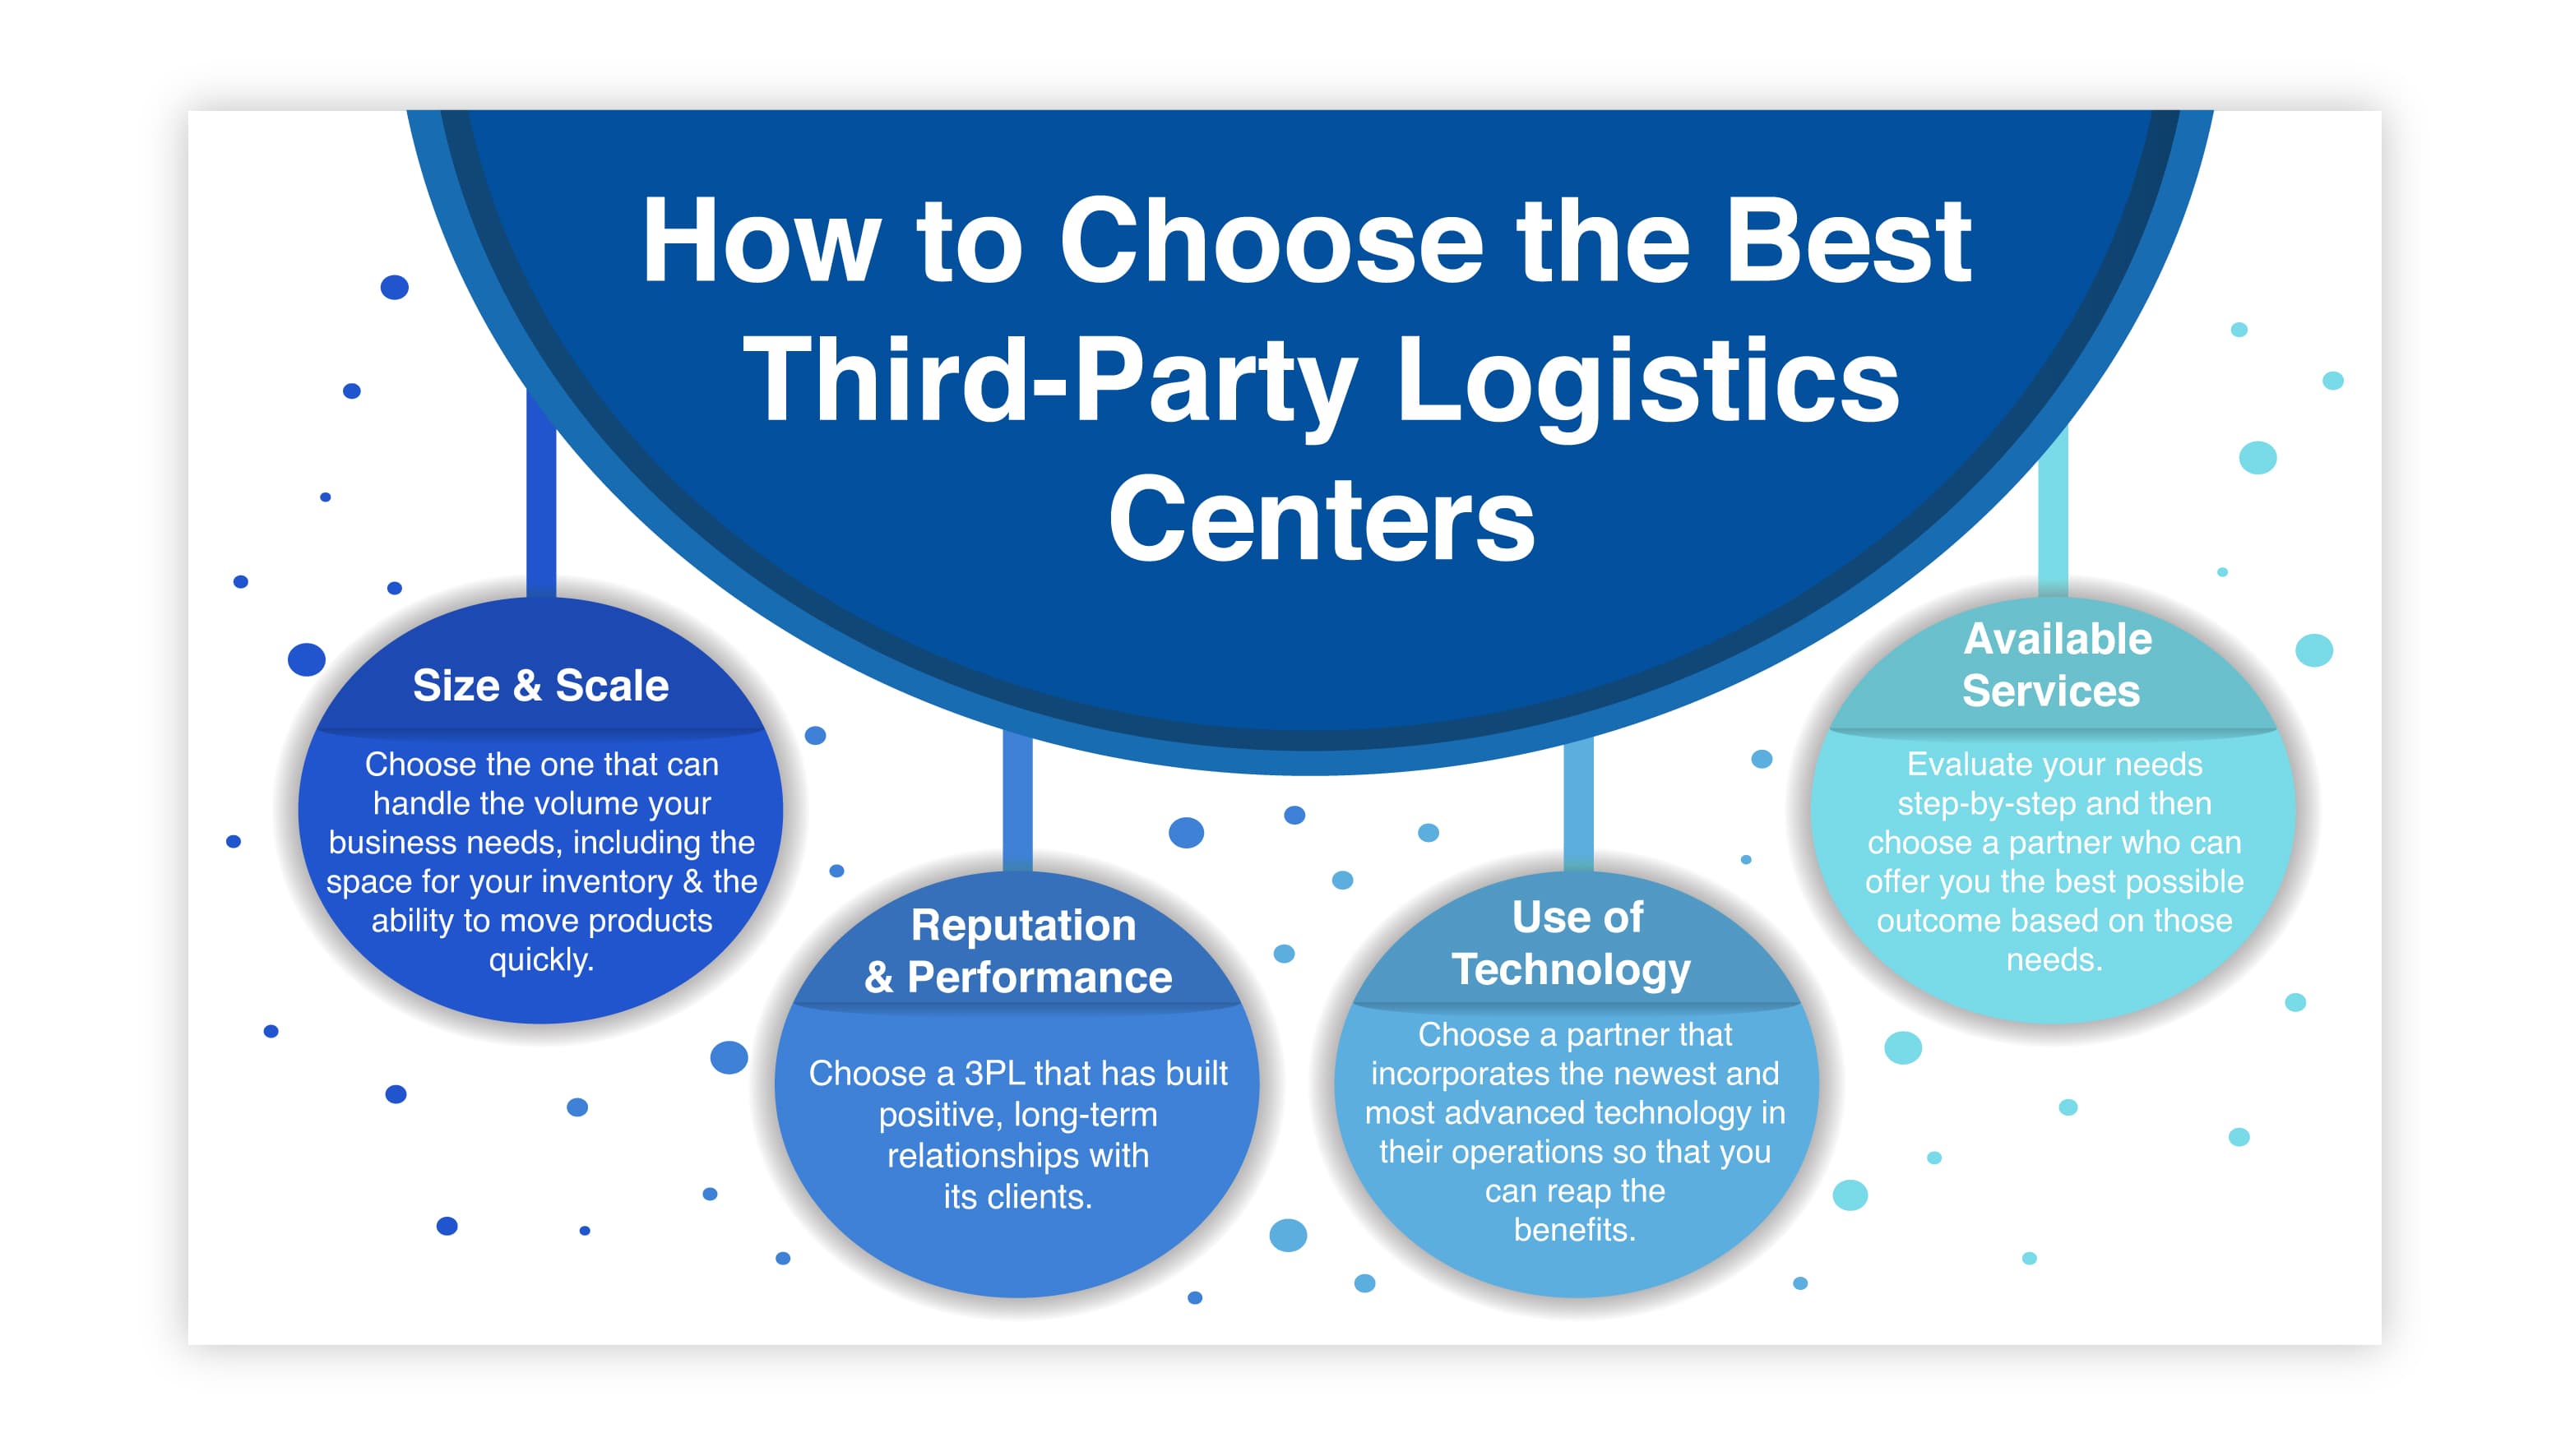 How to Choose the Best Third-Party Logistics Centers